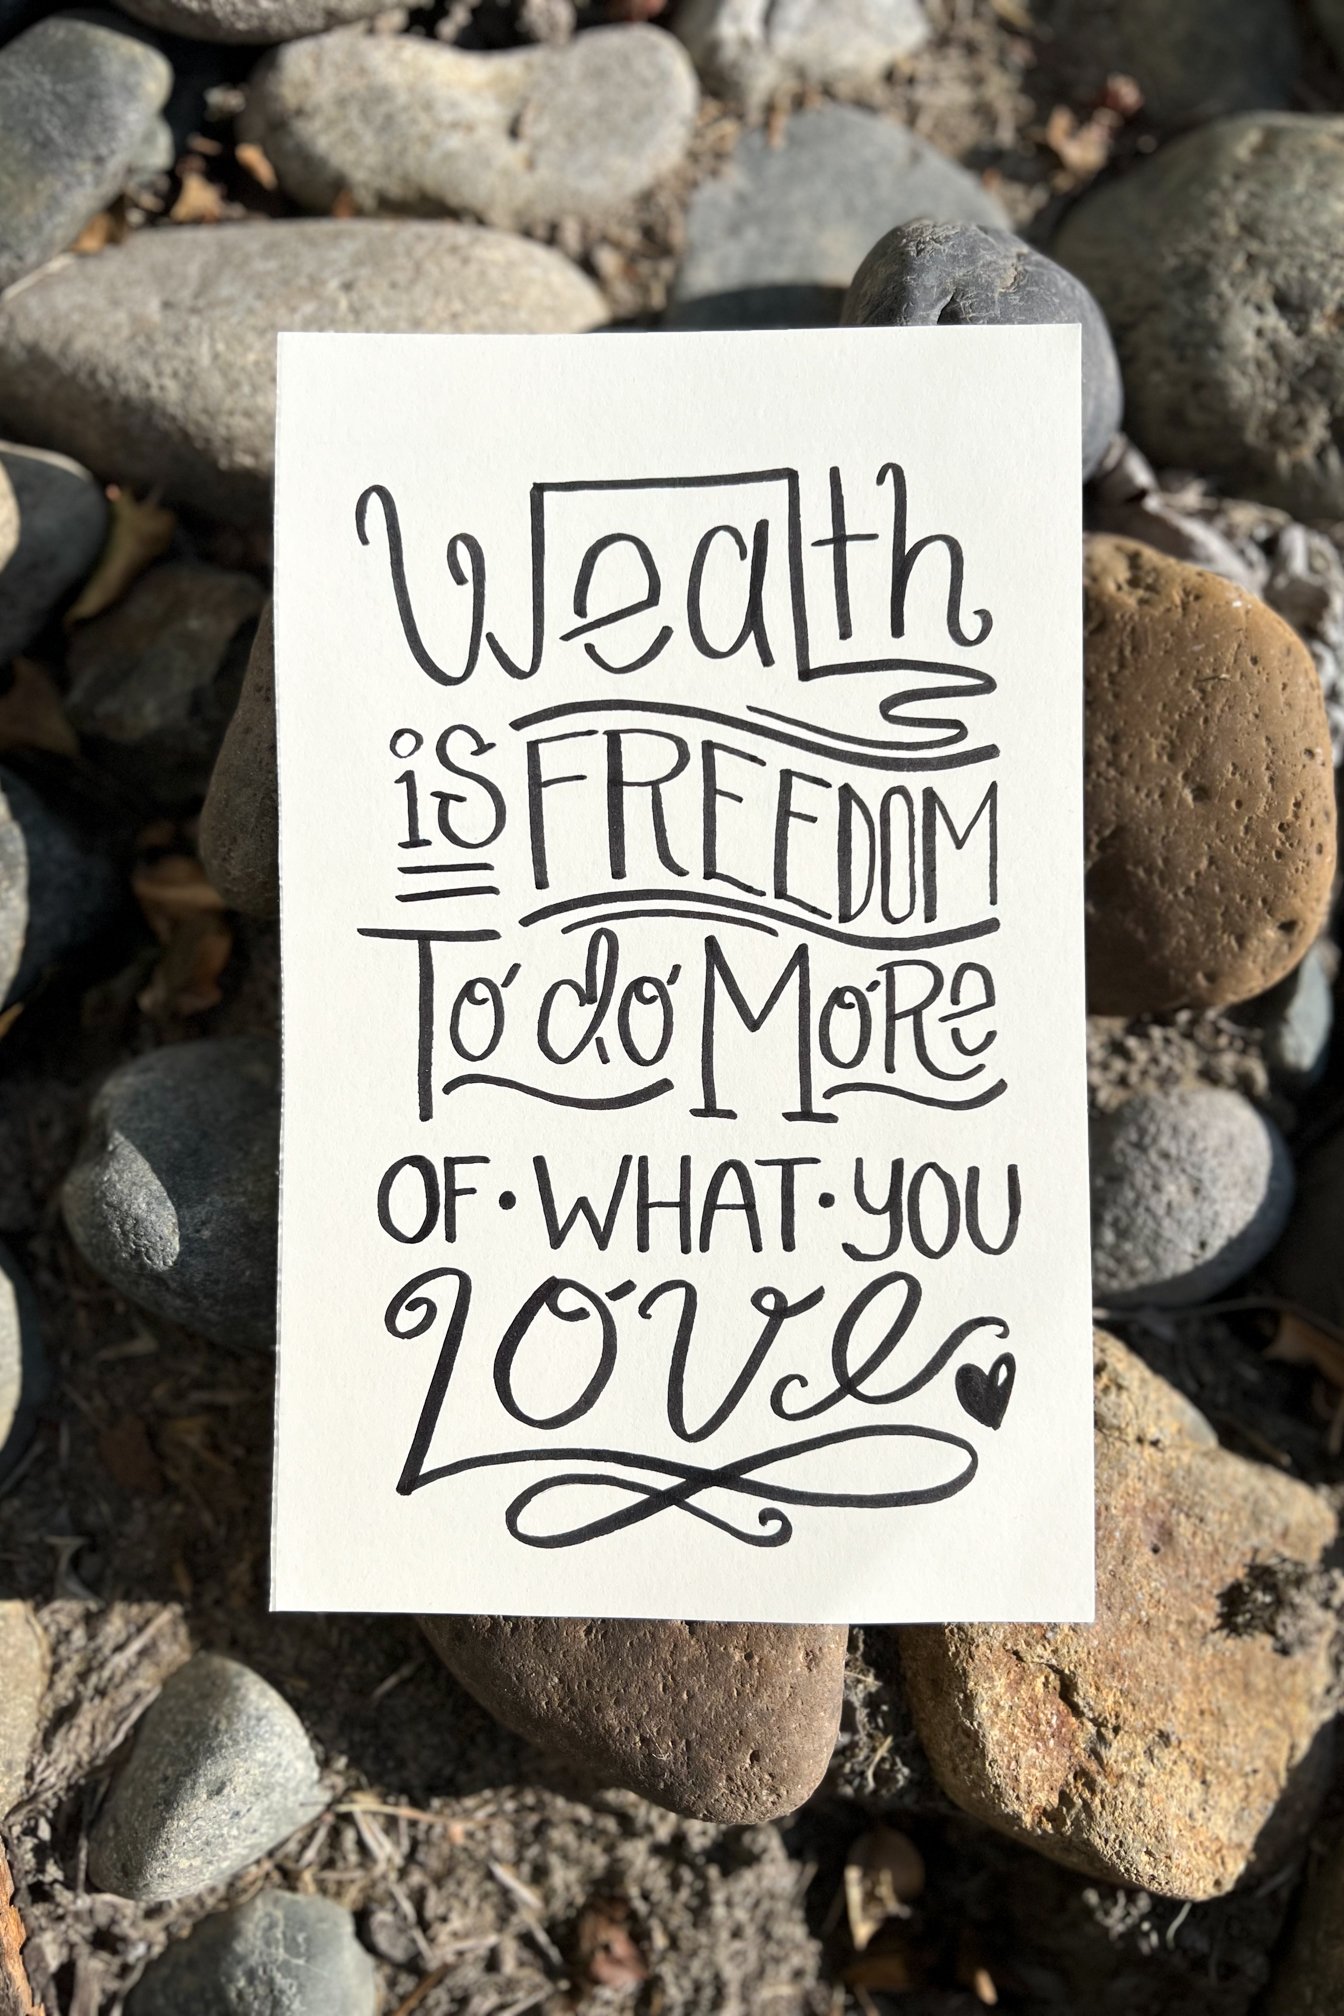 wealth-is-freedom-photo-love-notes-for-life.jpg